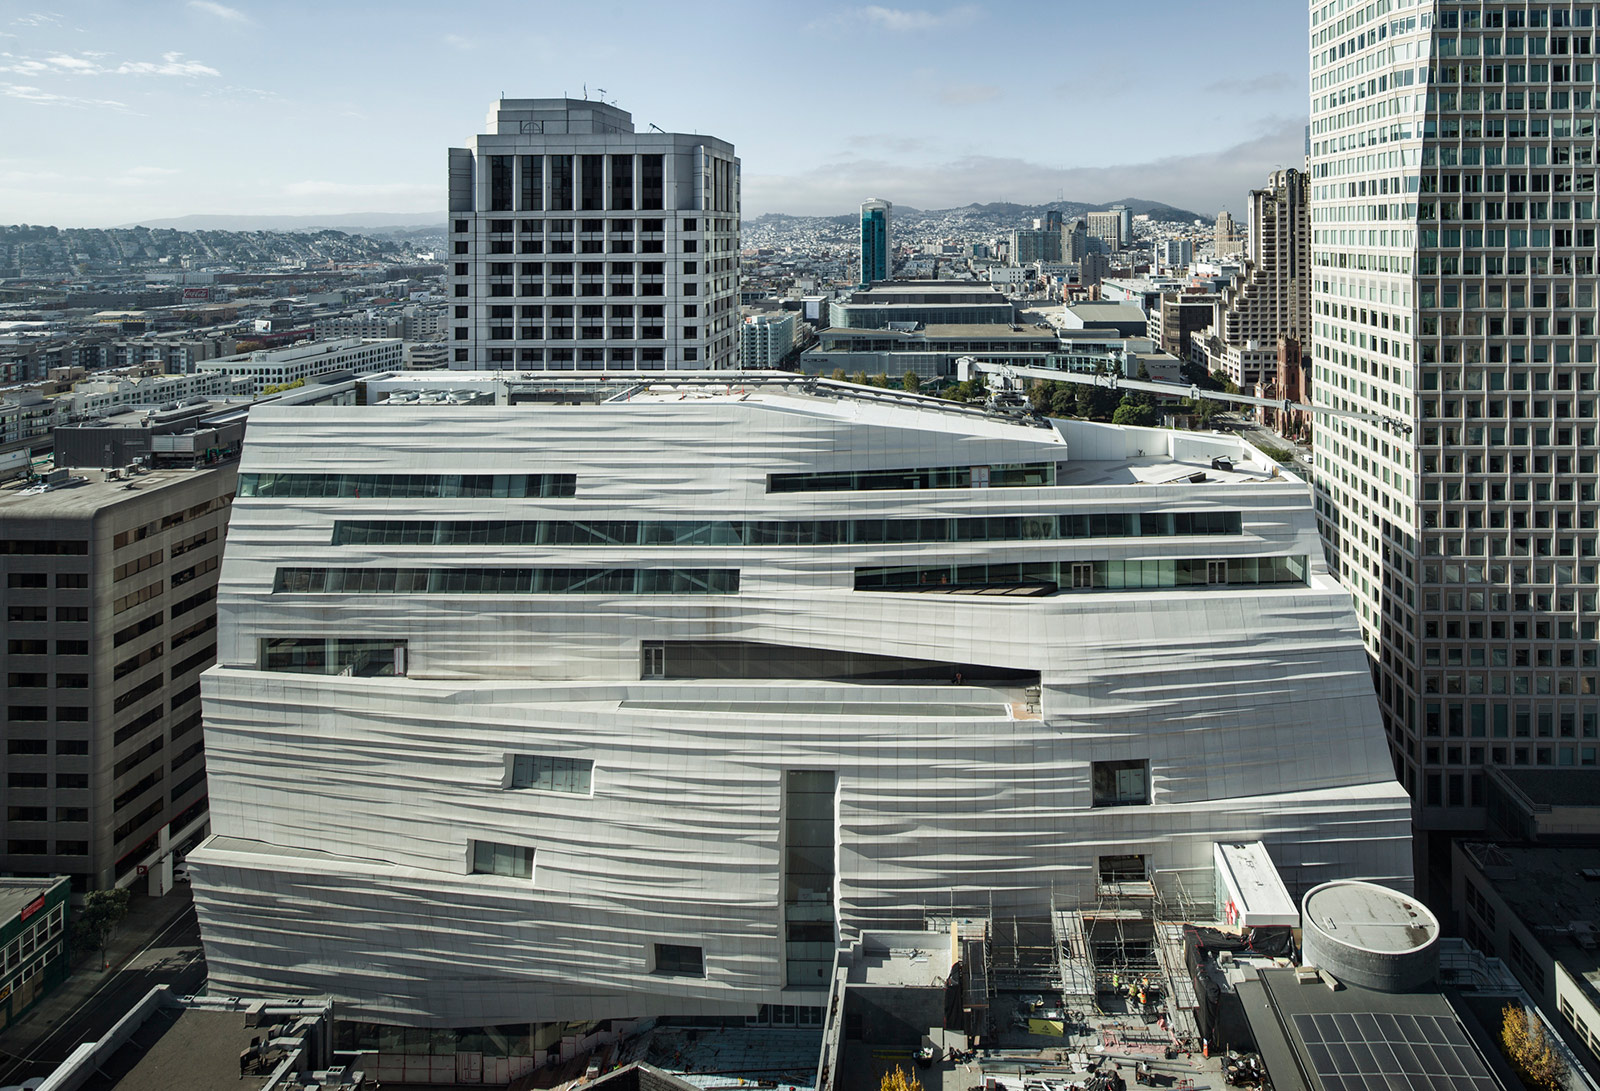 Sound Matters to SFMOMA: Meyer Sound Collaborates to Provide State-of-the-Art Sound in Transformational Renovation